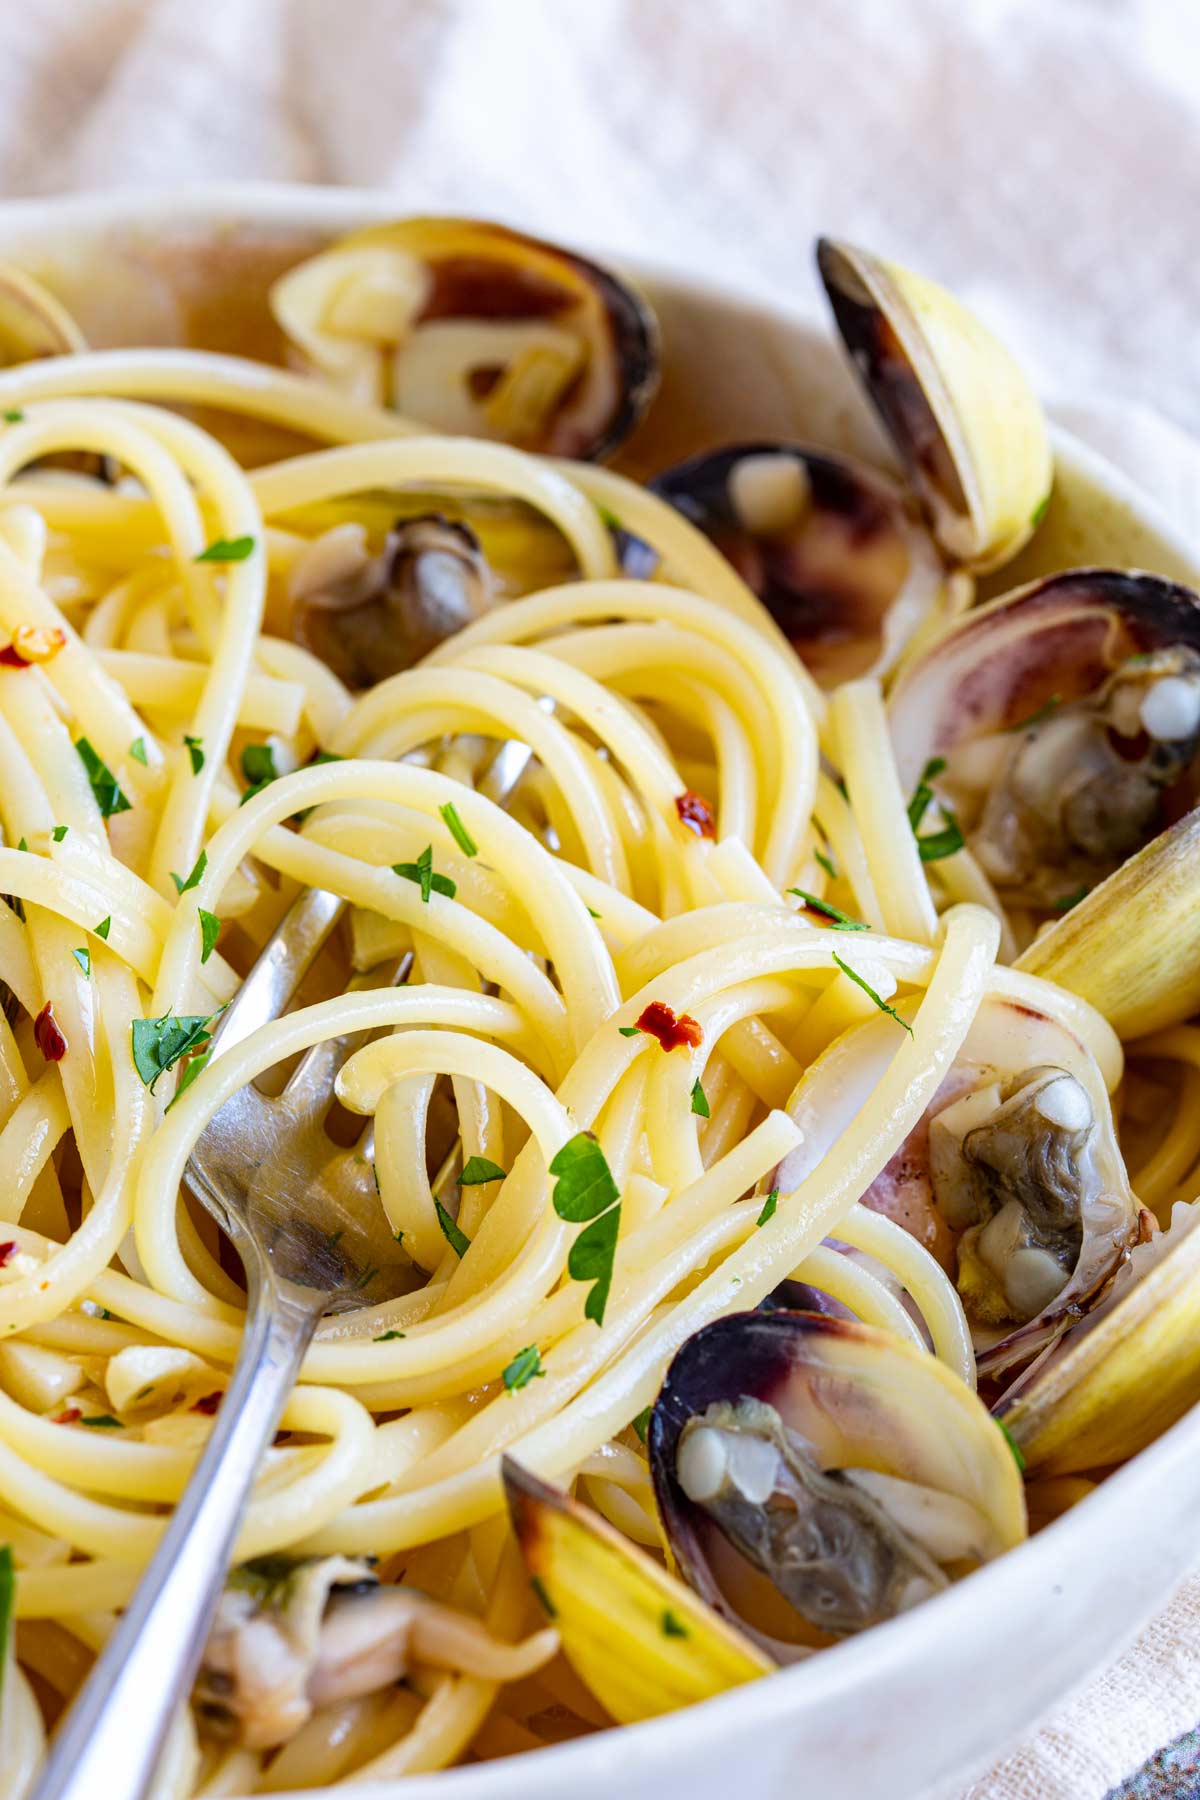 a fork swirling up pasta from a bowl of clams and linguine with garlic, chili and parsley